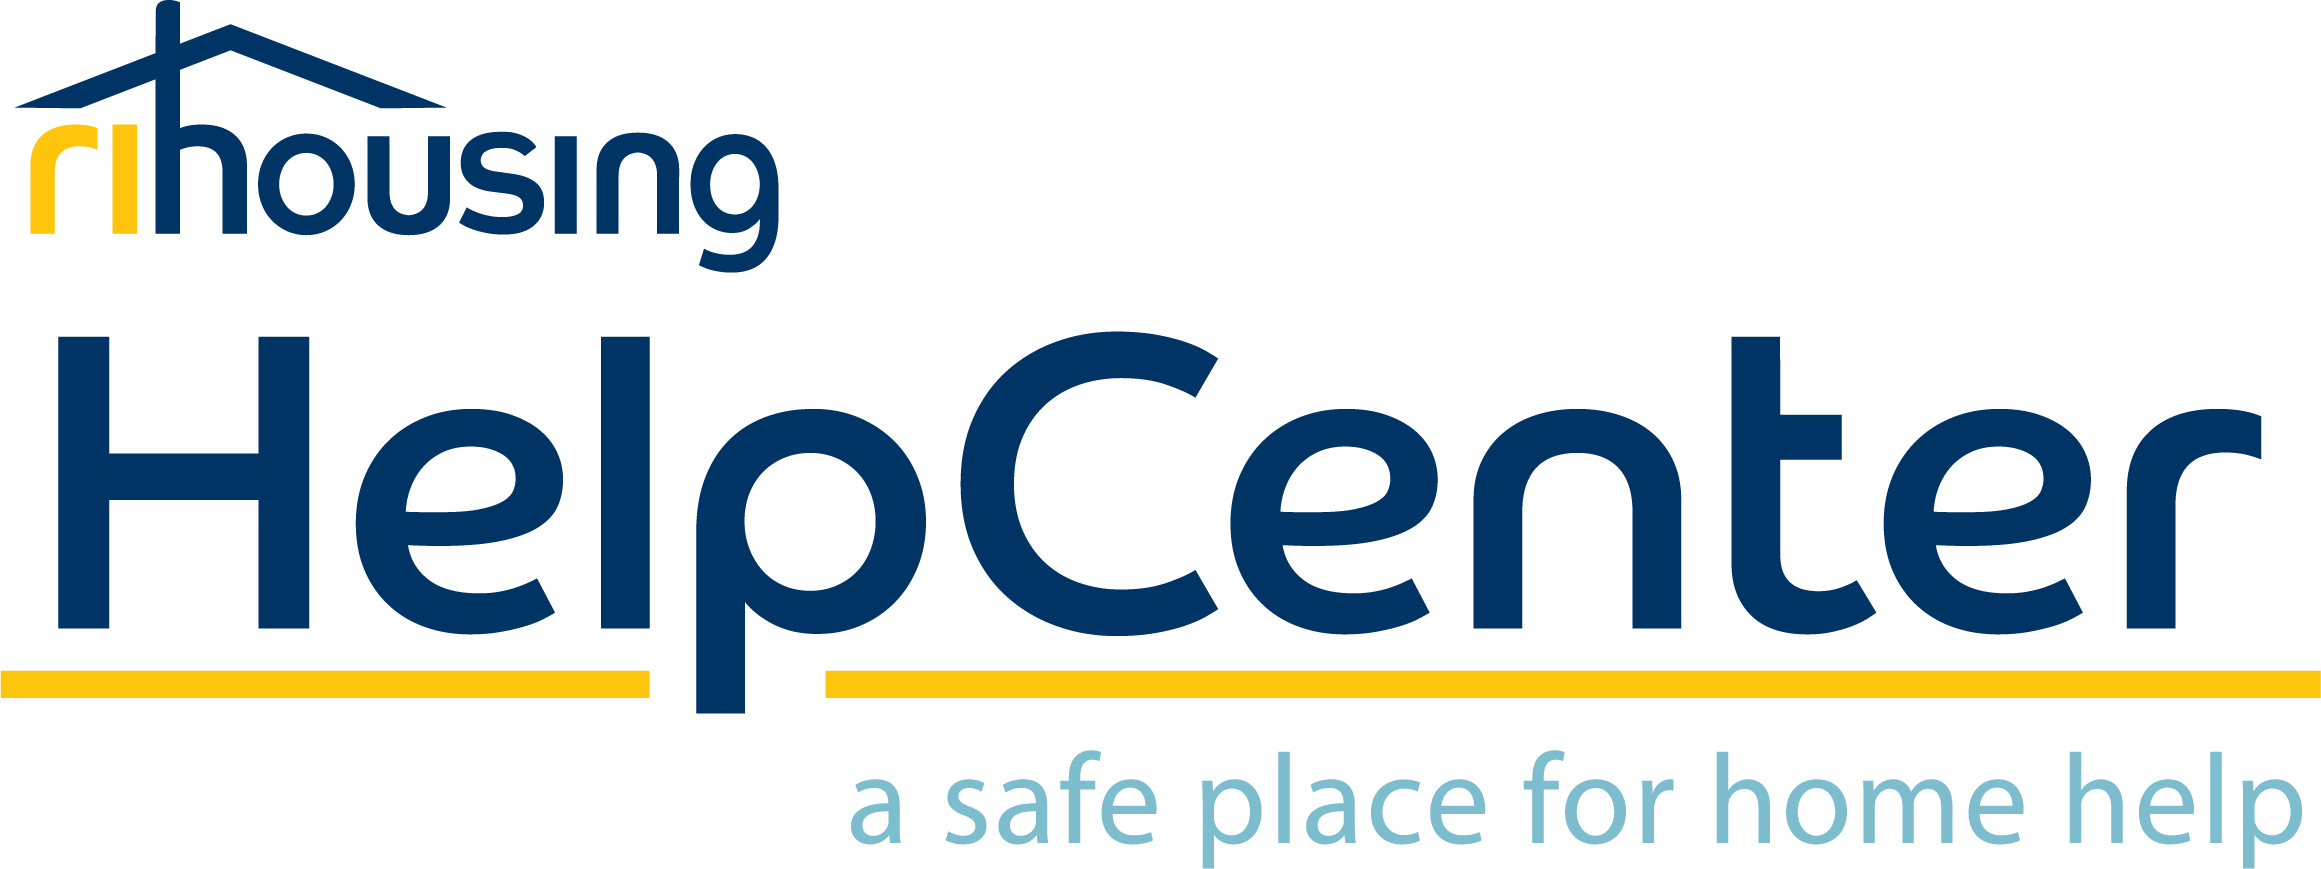 RIHousing Helpcenter: A safe place for home help